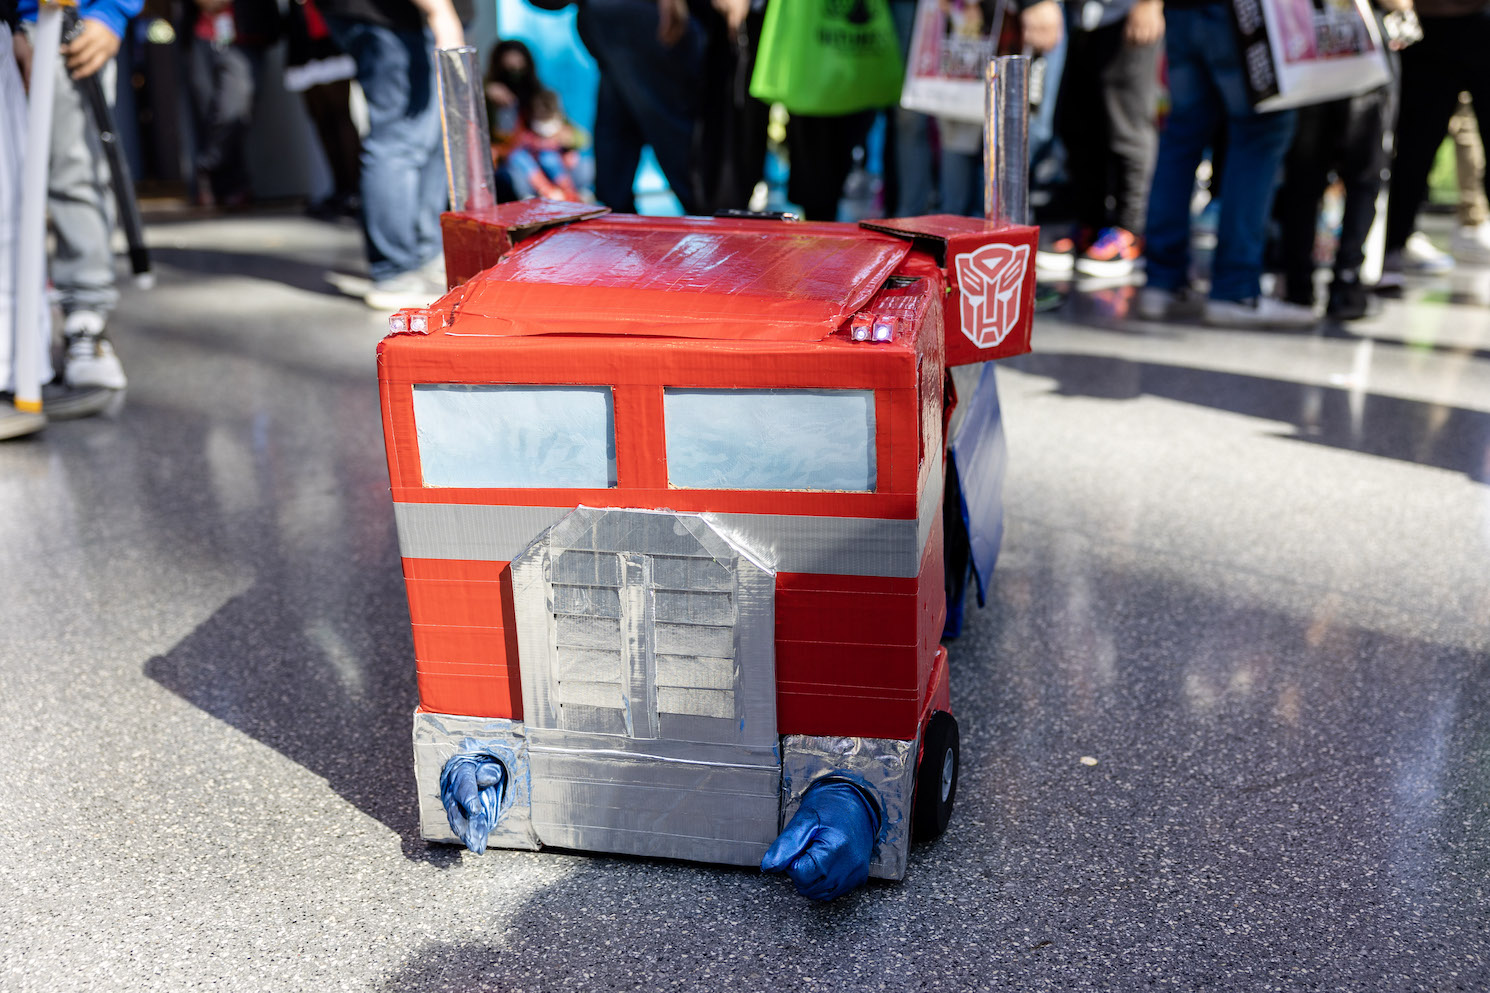 A cosplayer dressed in a cardboard costume of the Transformers character Optimus Prime.